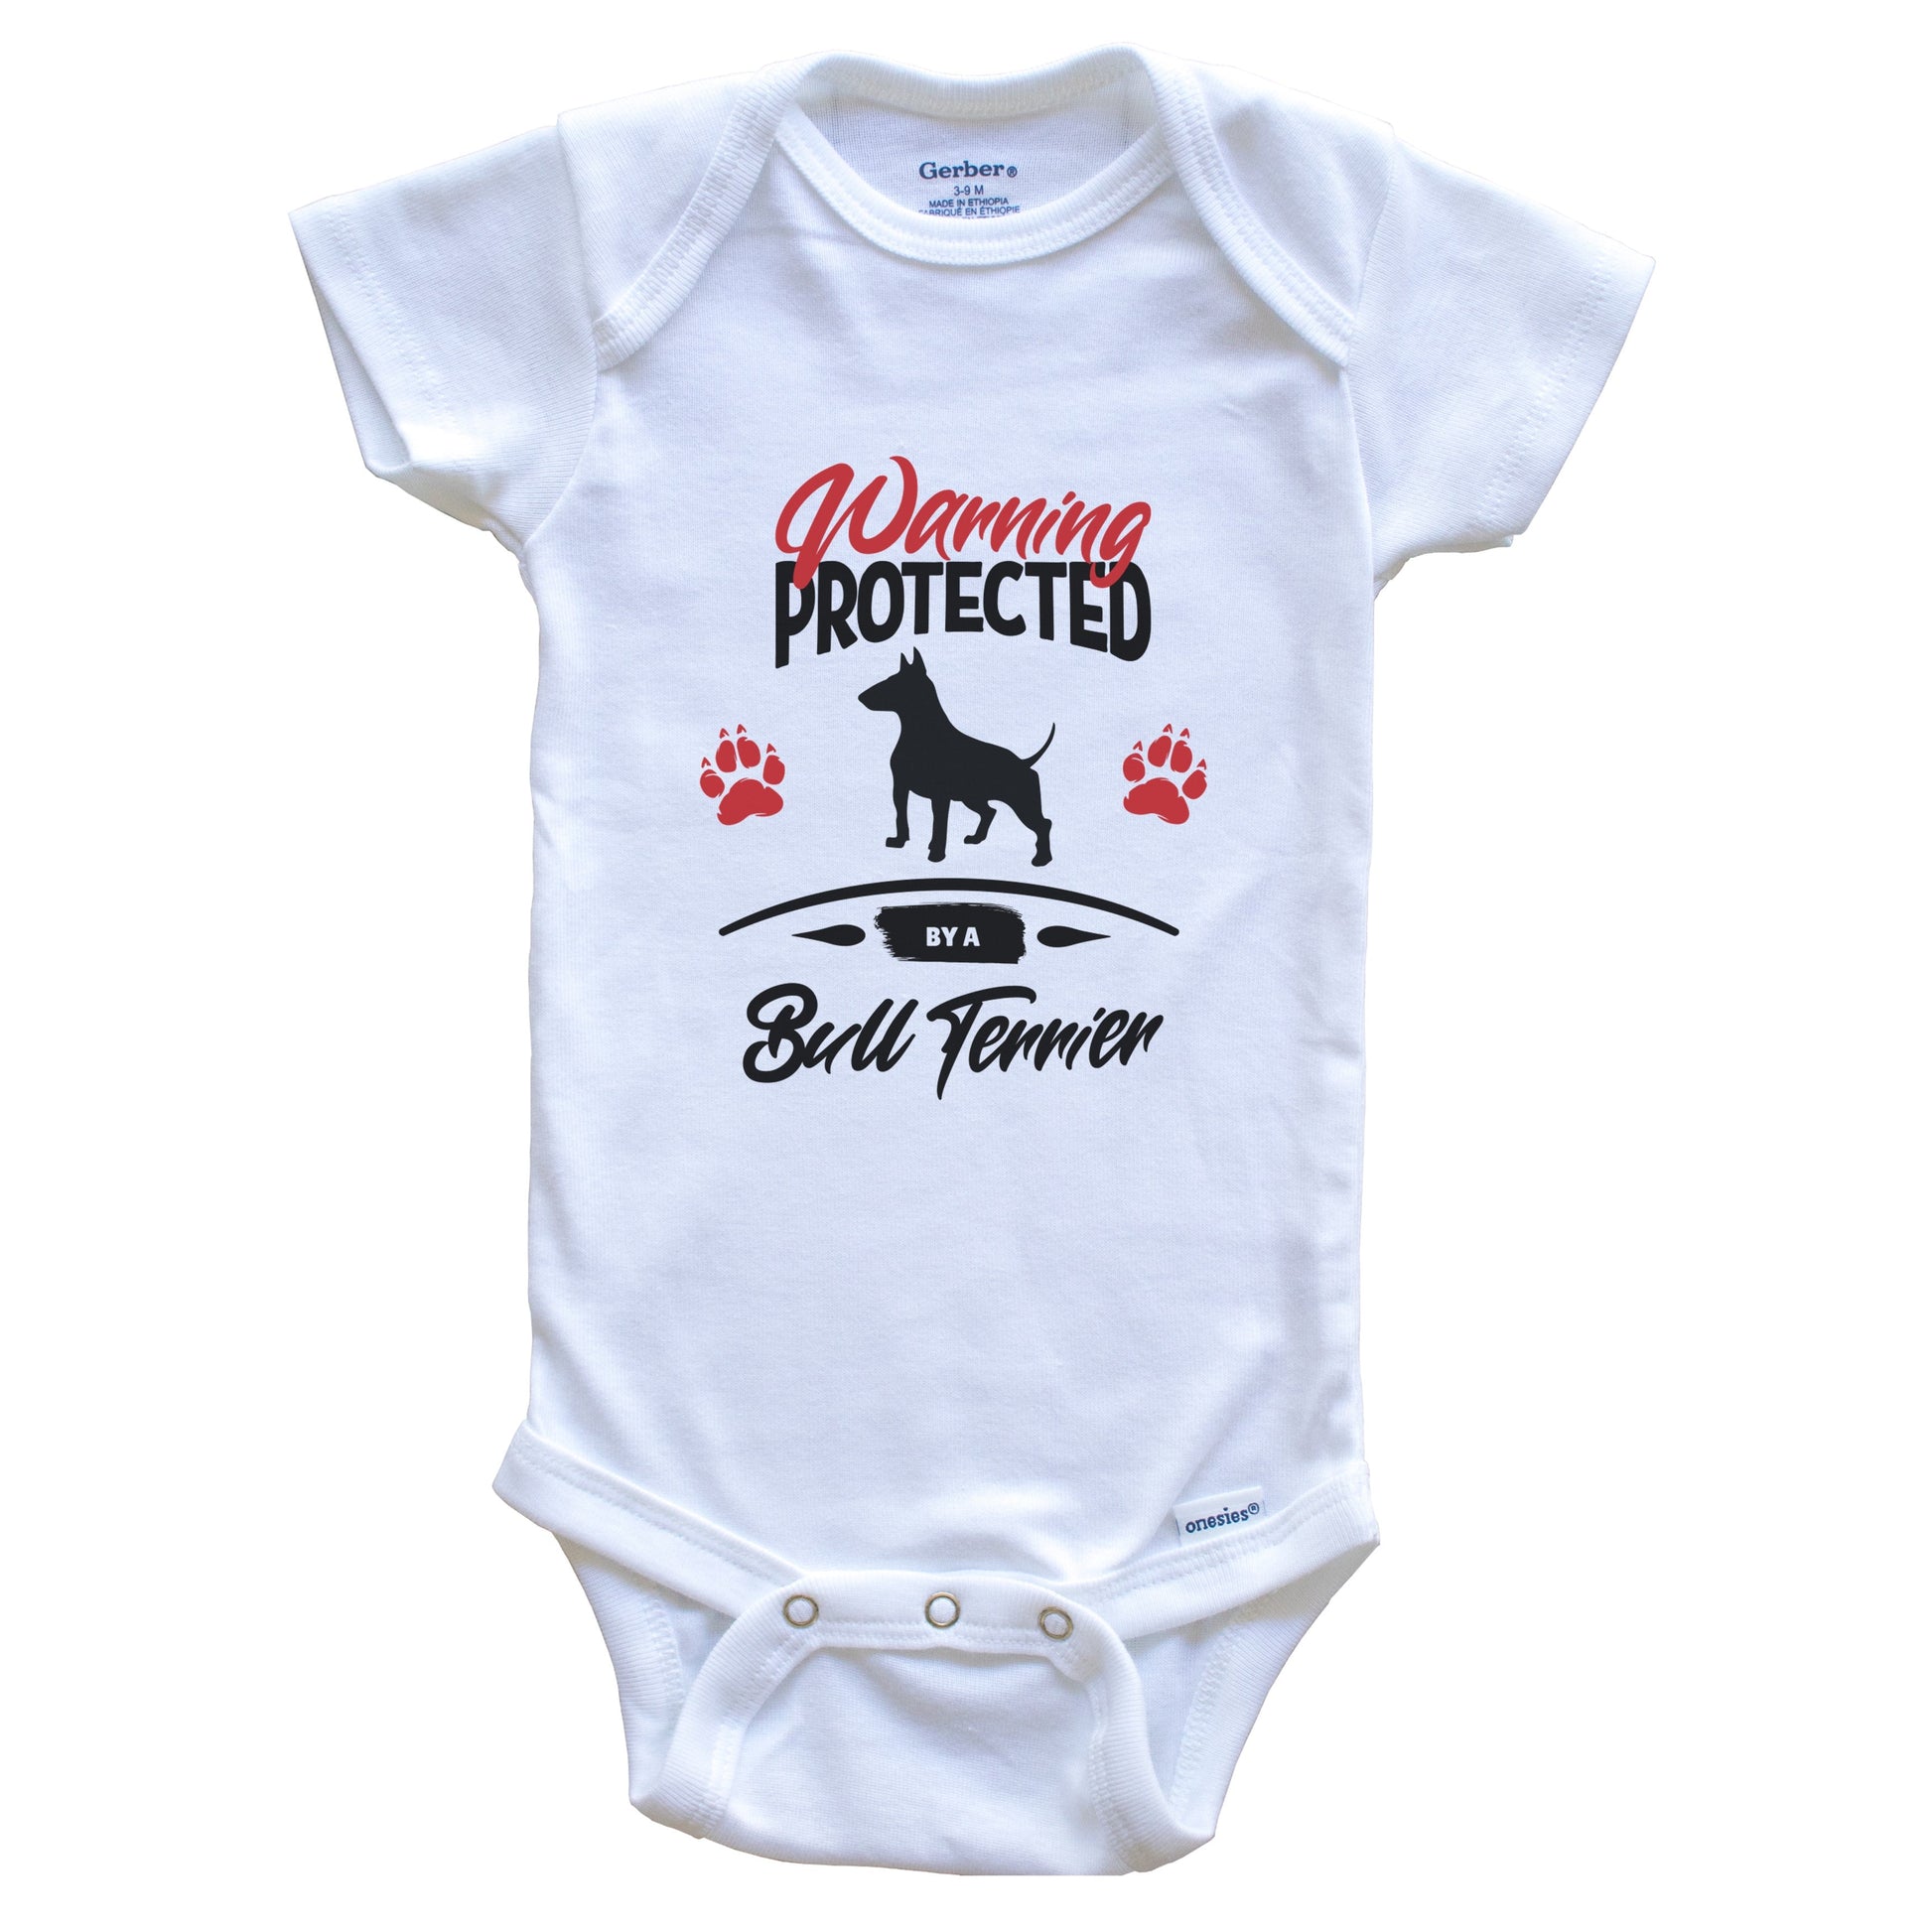 Warning Protected By A Bull Terrier Funny Dog Owner Baby Bodysuit